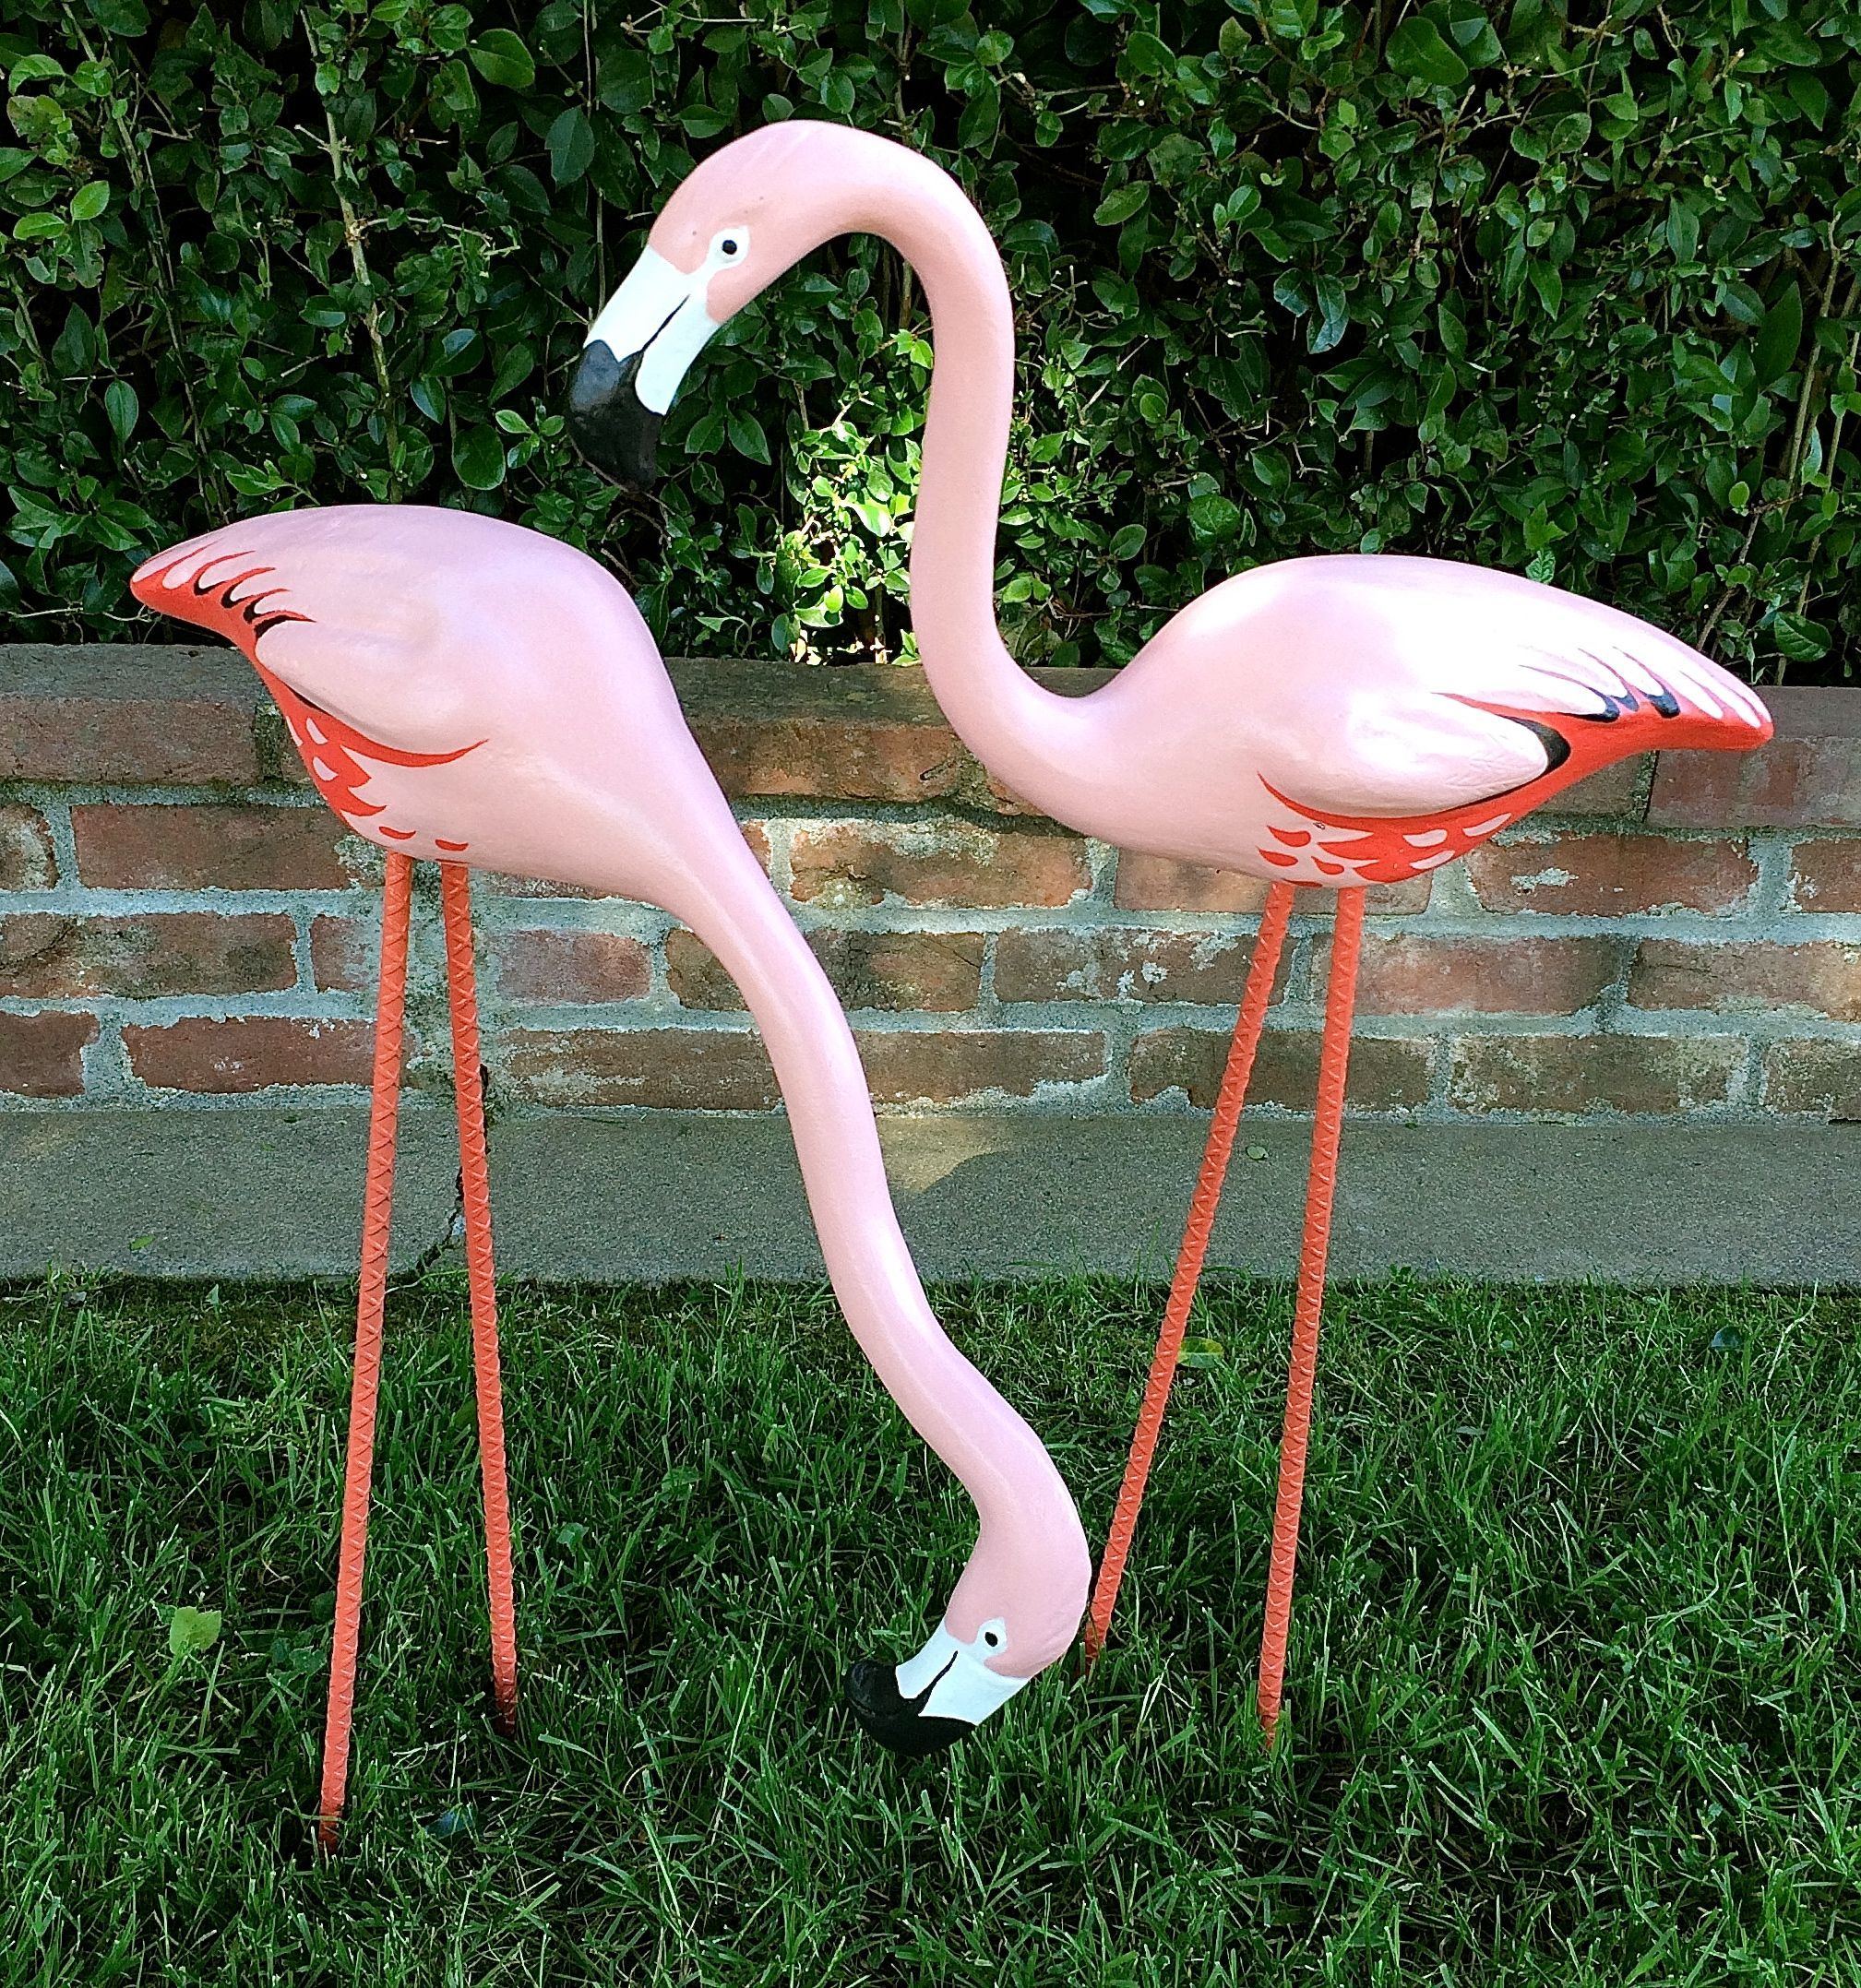 Picasso recommendet flamingo your a swinger Pink means